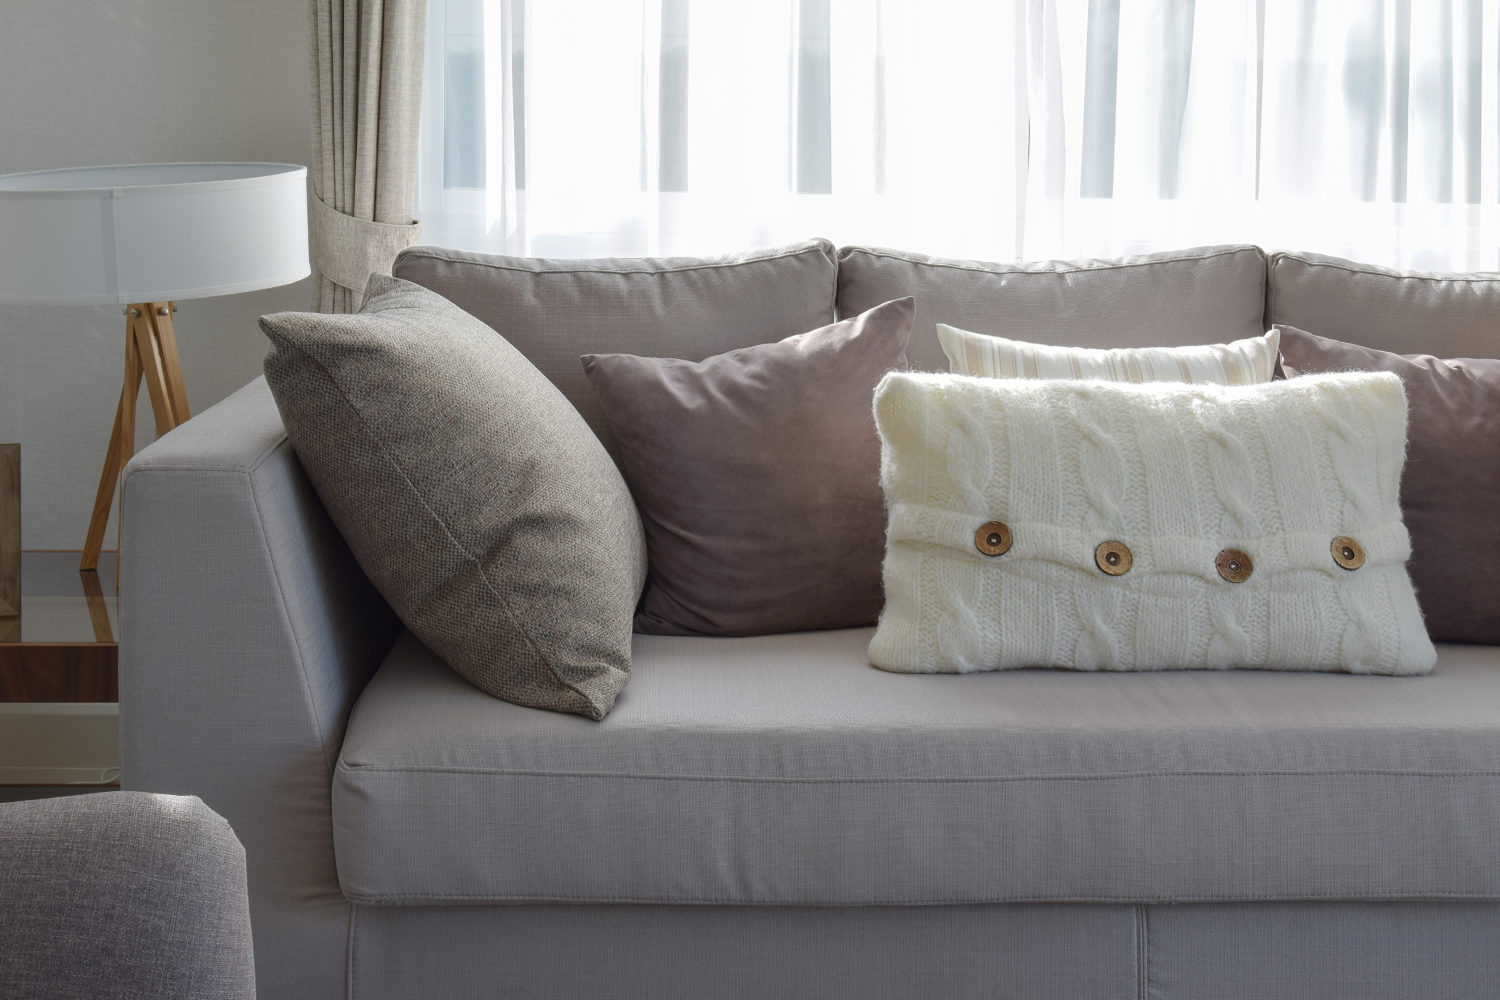 How To Firm Up Sofa Back Cushions